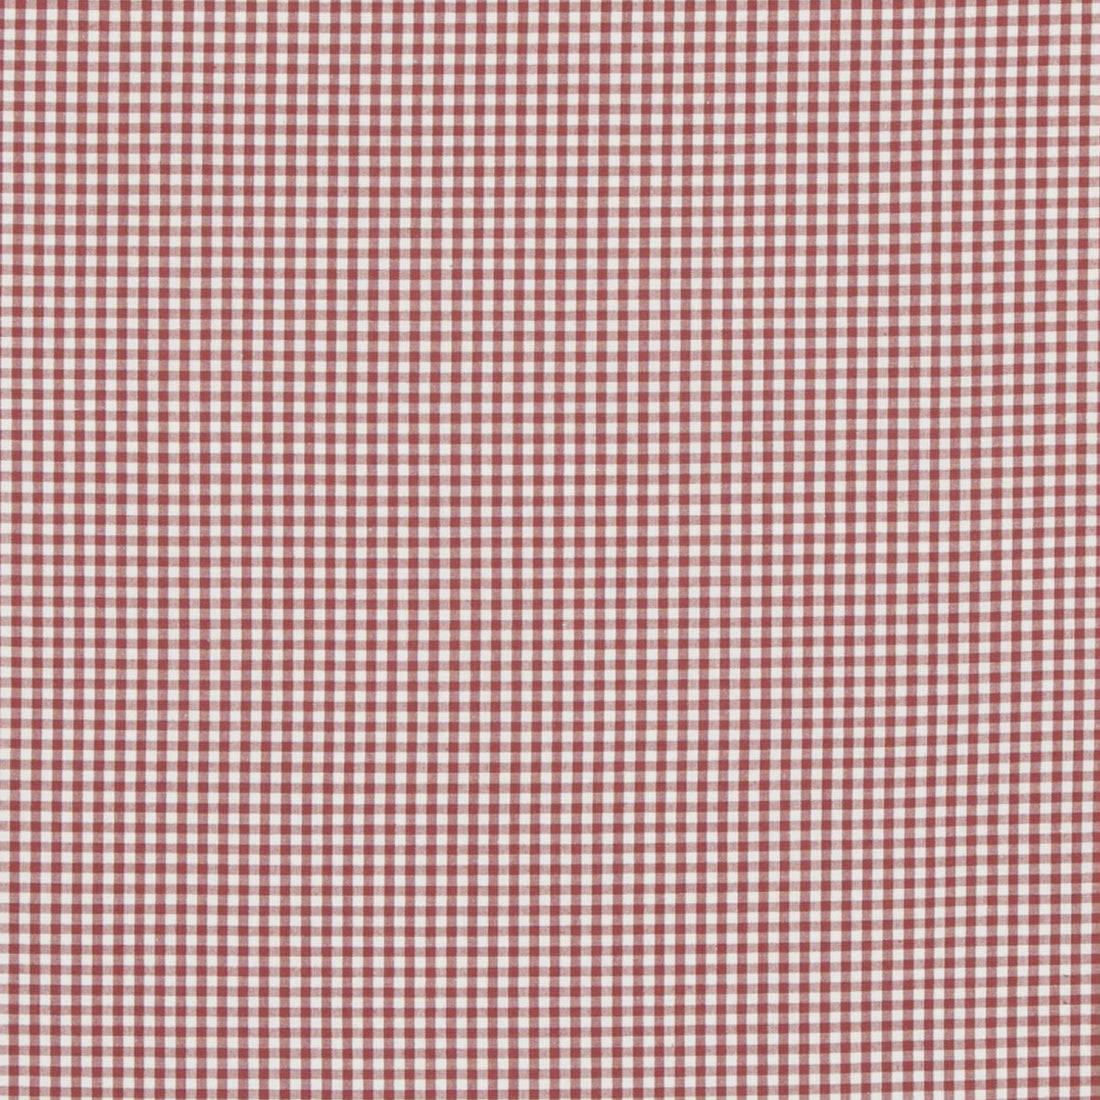 Sherborne Gingham fabric in red color - pattern PF50506.450.0 - by Baker Lifestyle in the Bridport collection